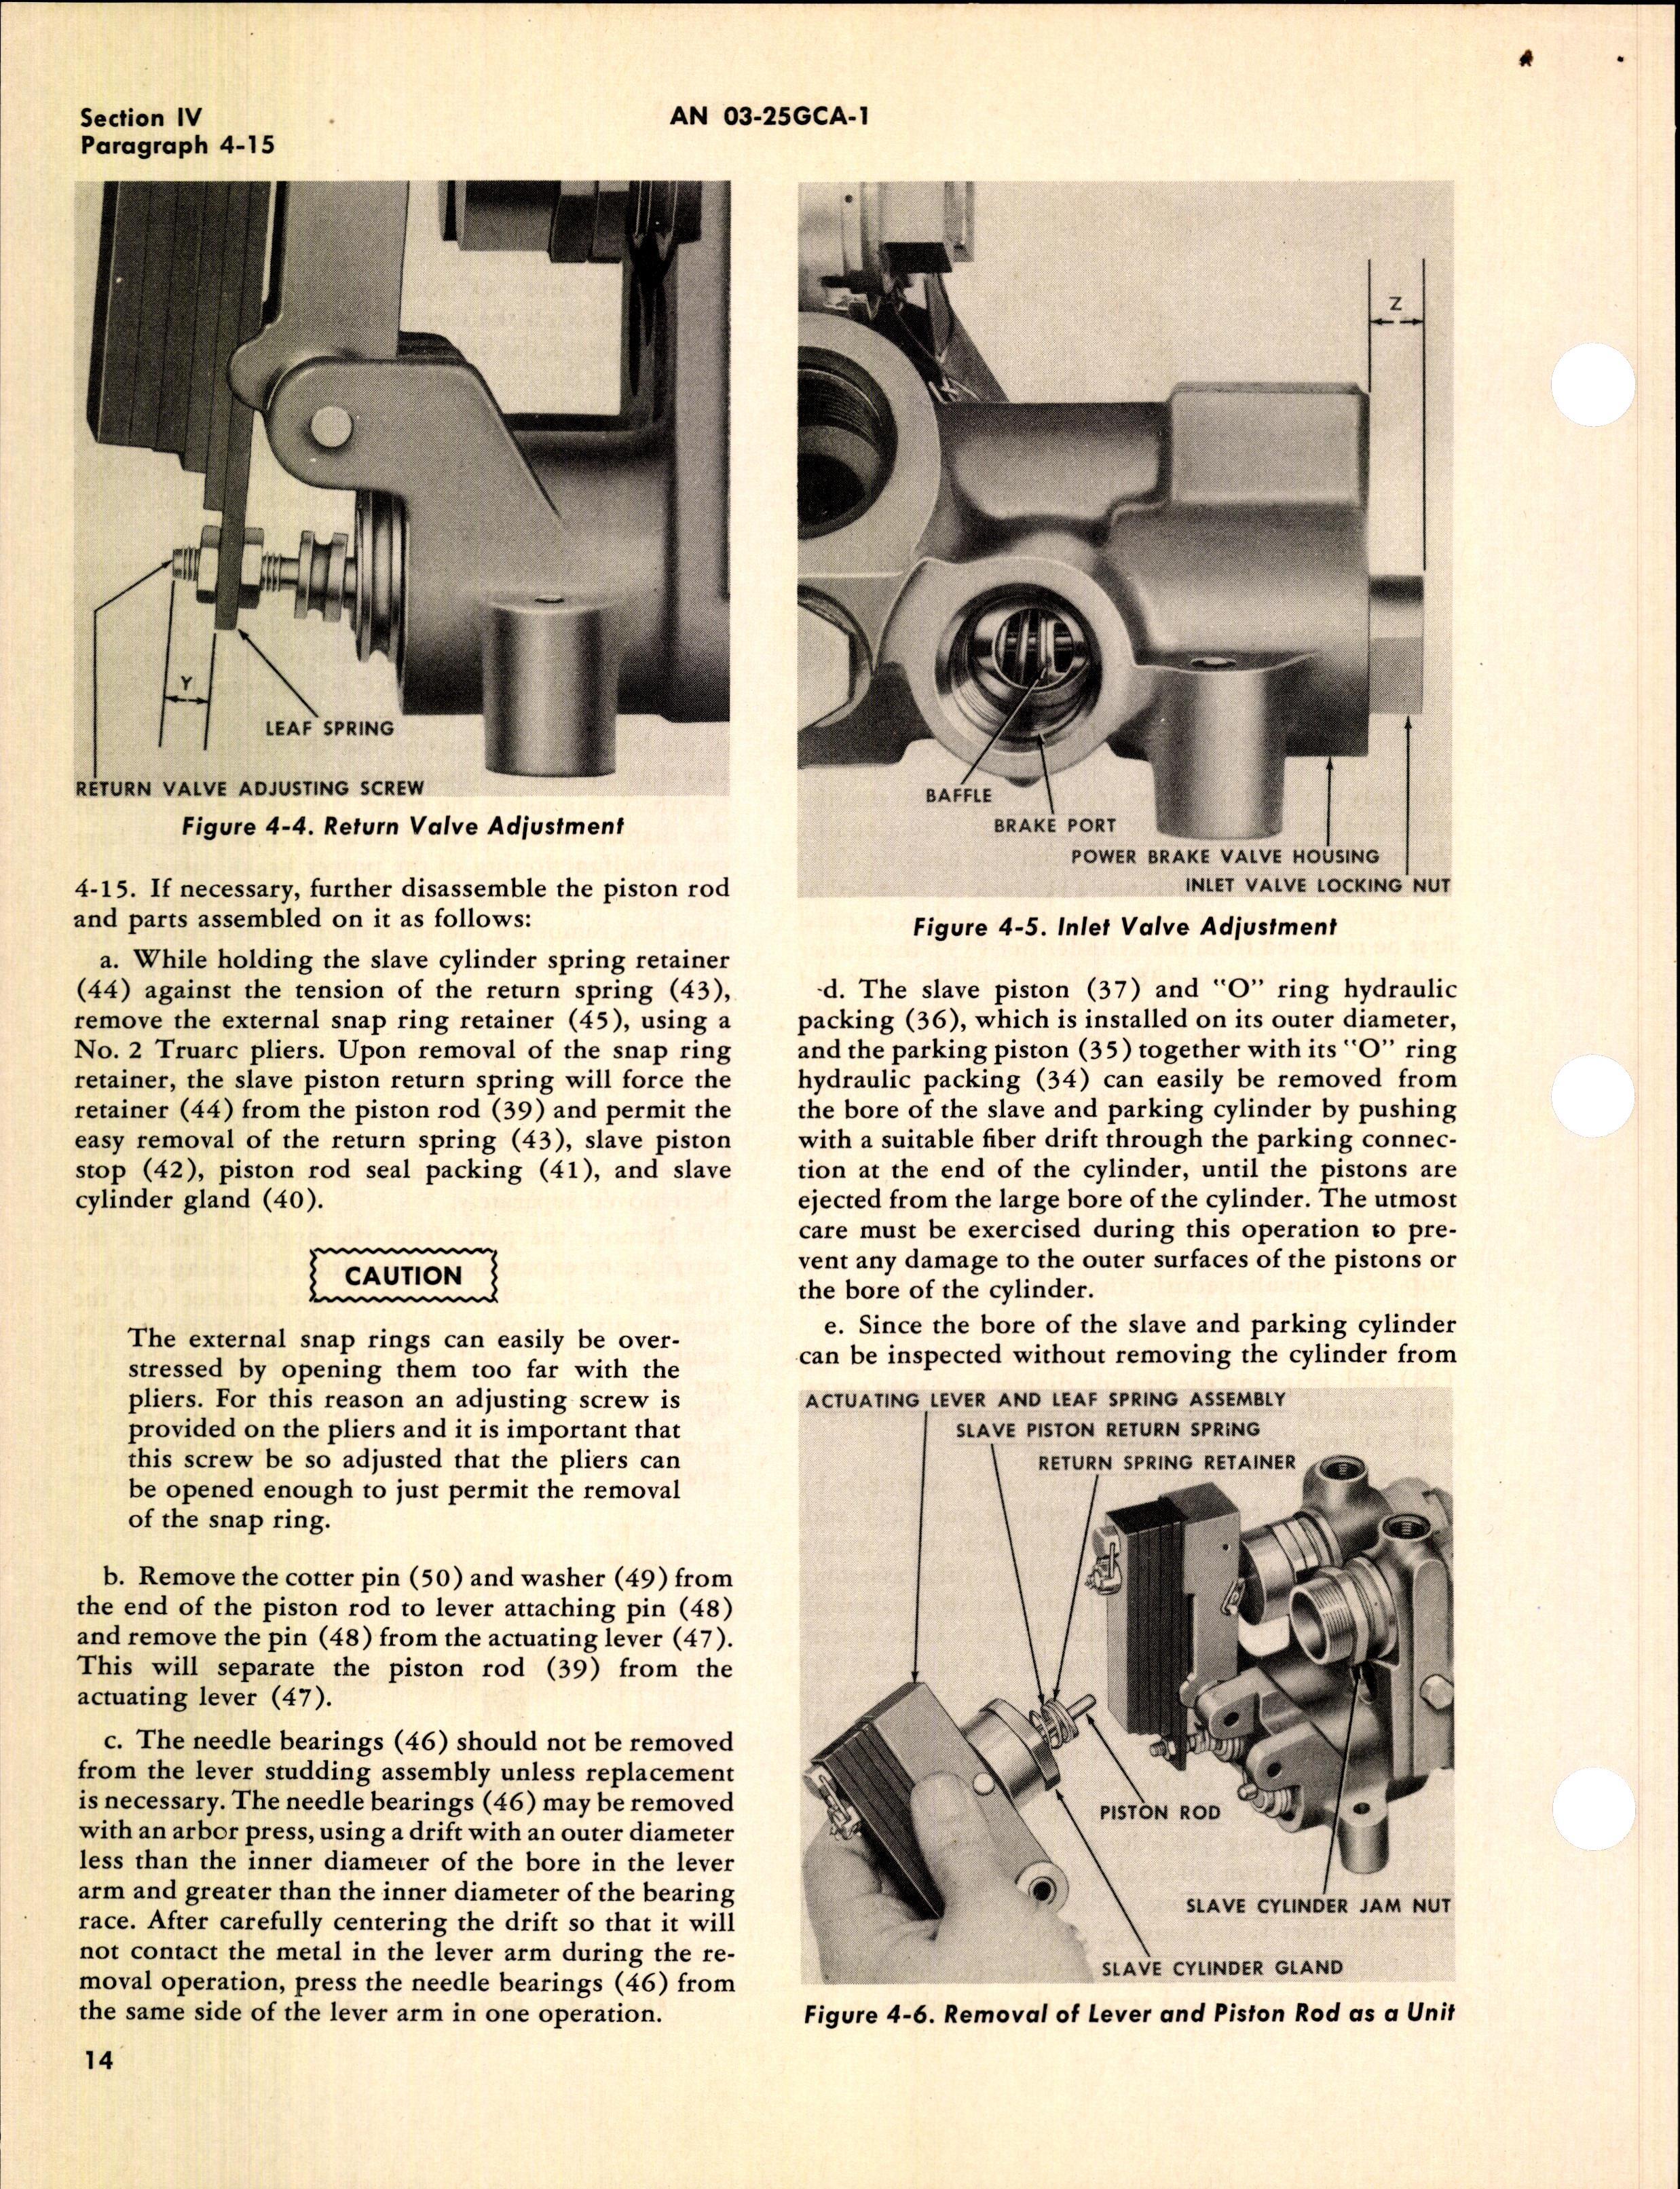 Sample page 18 from AirCorps Library document: Overhaul Instructions for Power Brake Valves